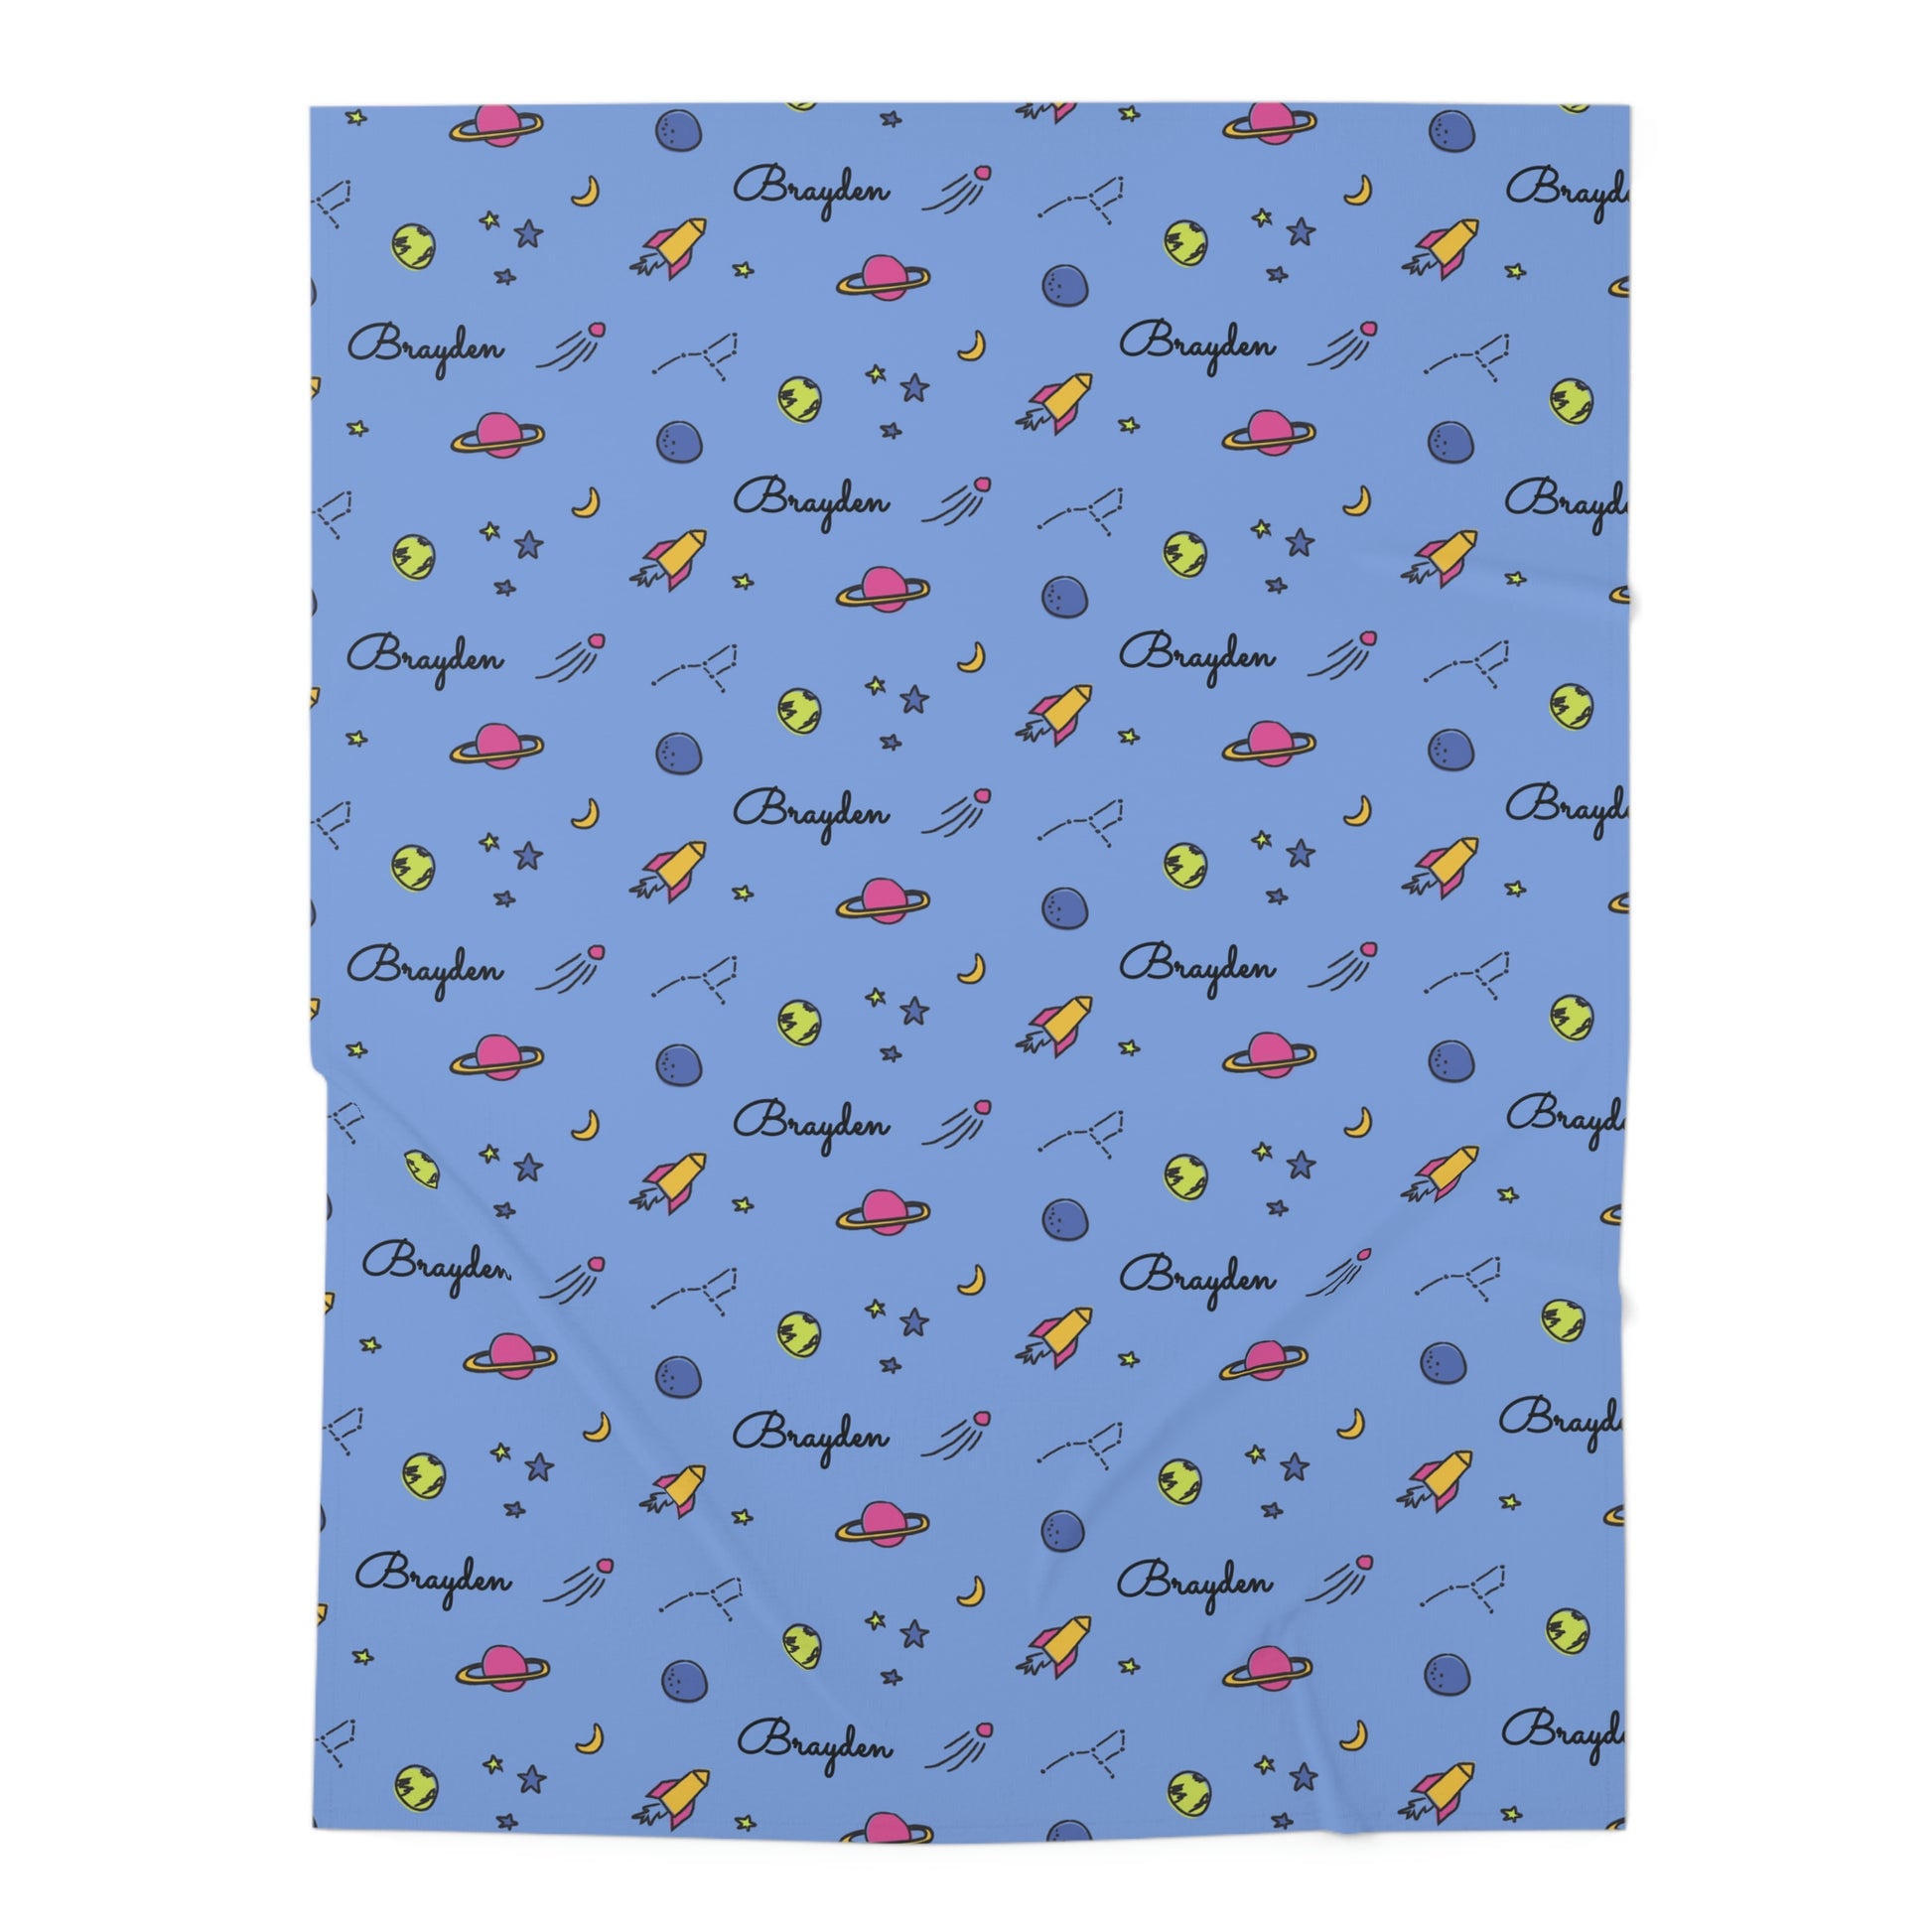 Jersey personalized baby blanket in space, rocket and stars pattern laid flat